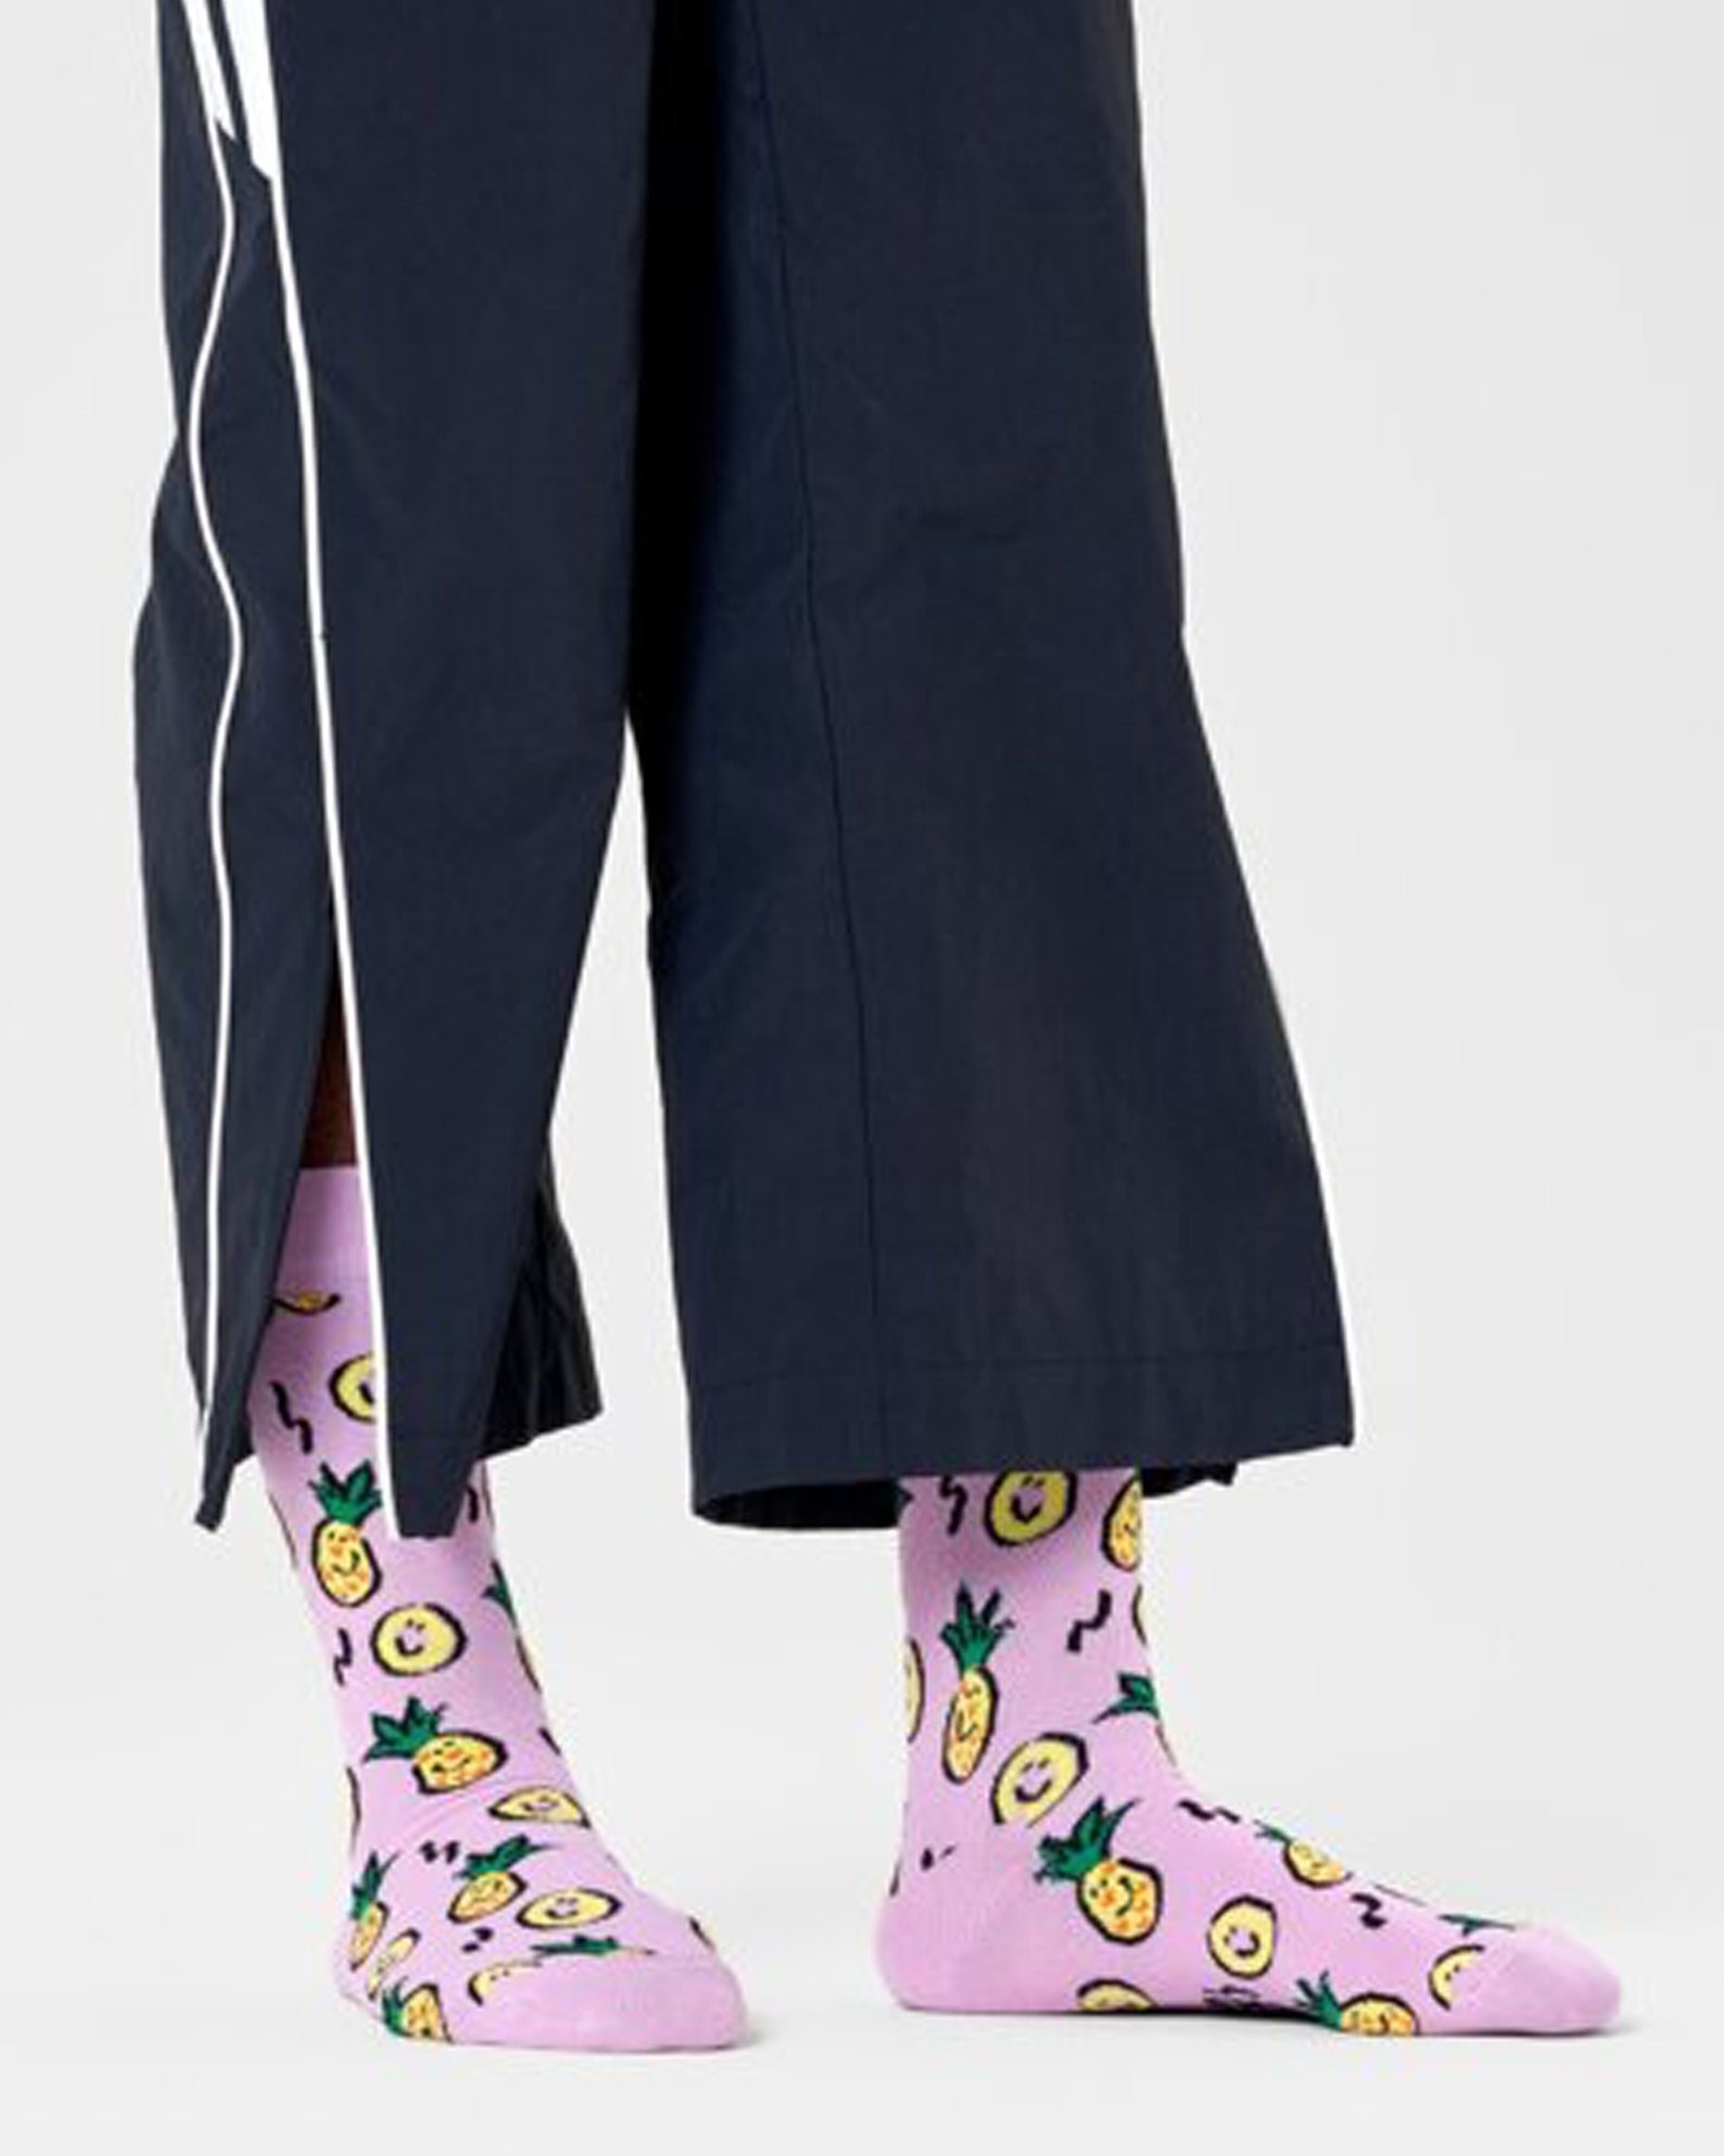 Happy Socks P000718 Pineapple Sock - Light lilac cotton crew length ankle socks with an all over pattern of smiling cartoon pineapples in shades of yellow, green and black.